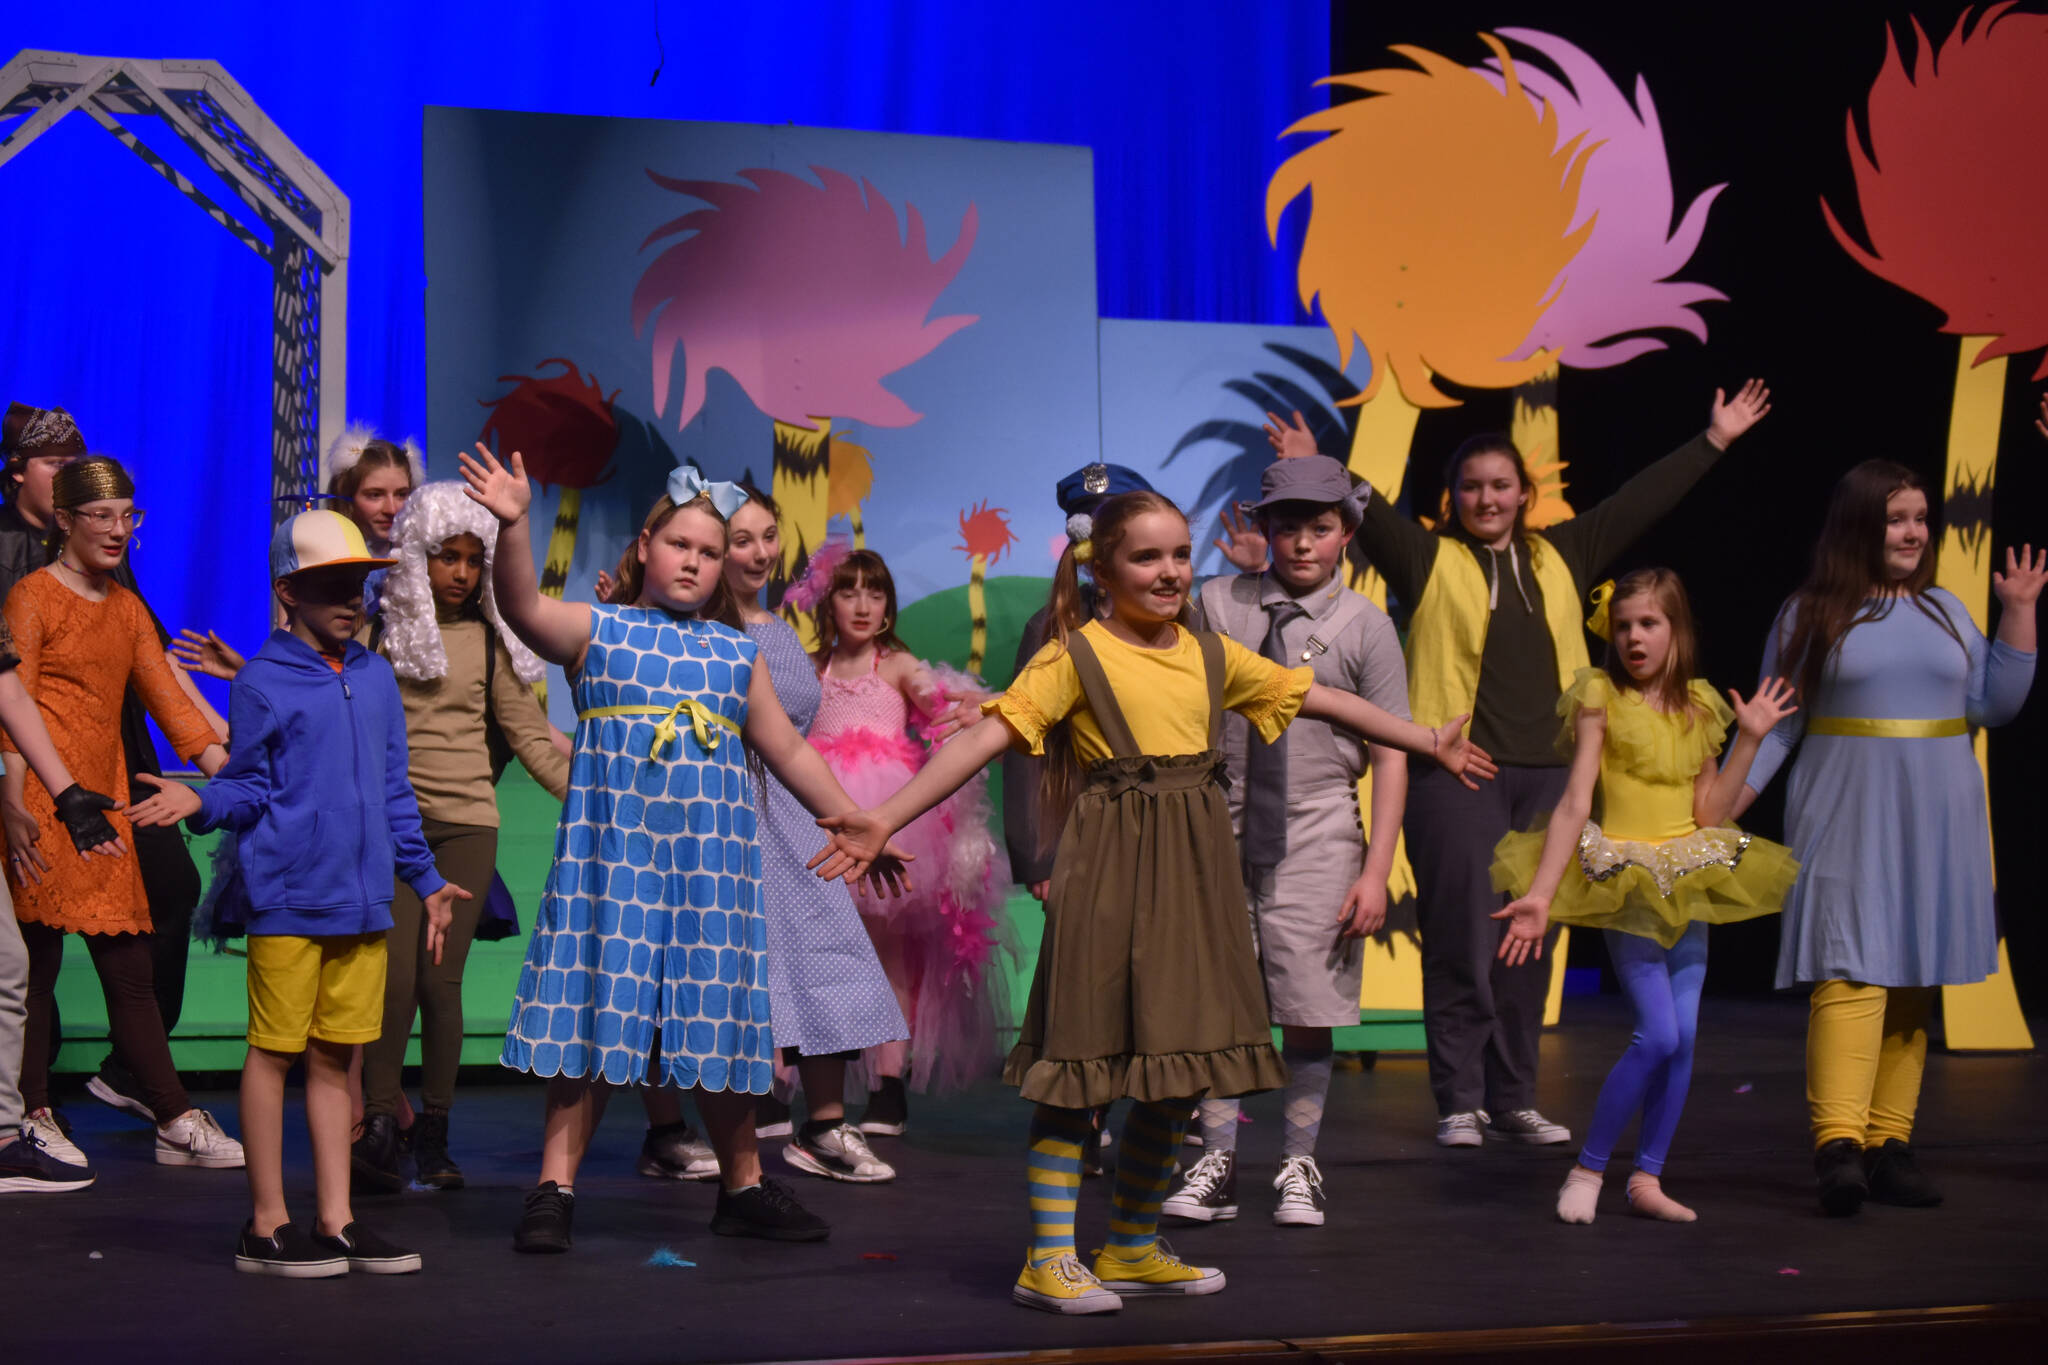 Morgan Hooper, as Jojo, and the cast of Triumvirate Theatre’s production of “Seussical” rehearse on Wednesday, Feb. 8, 2023, in the Renee C. Henderson Auditorium at Kenai Central High School in Kenai, Alaska. (Jake Dye/Peninsula Clarion)